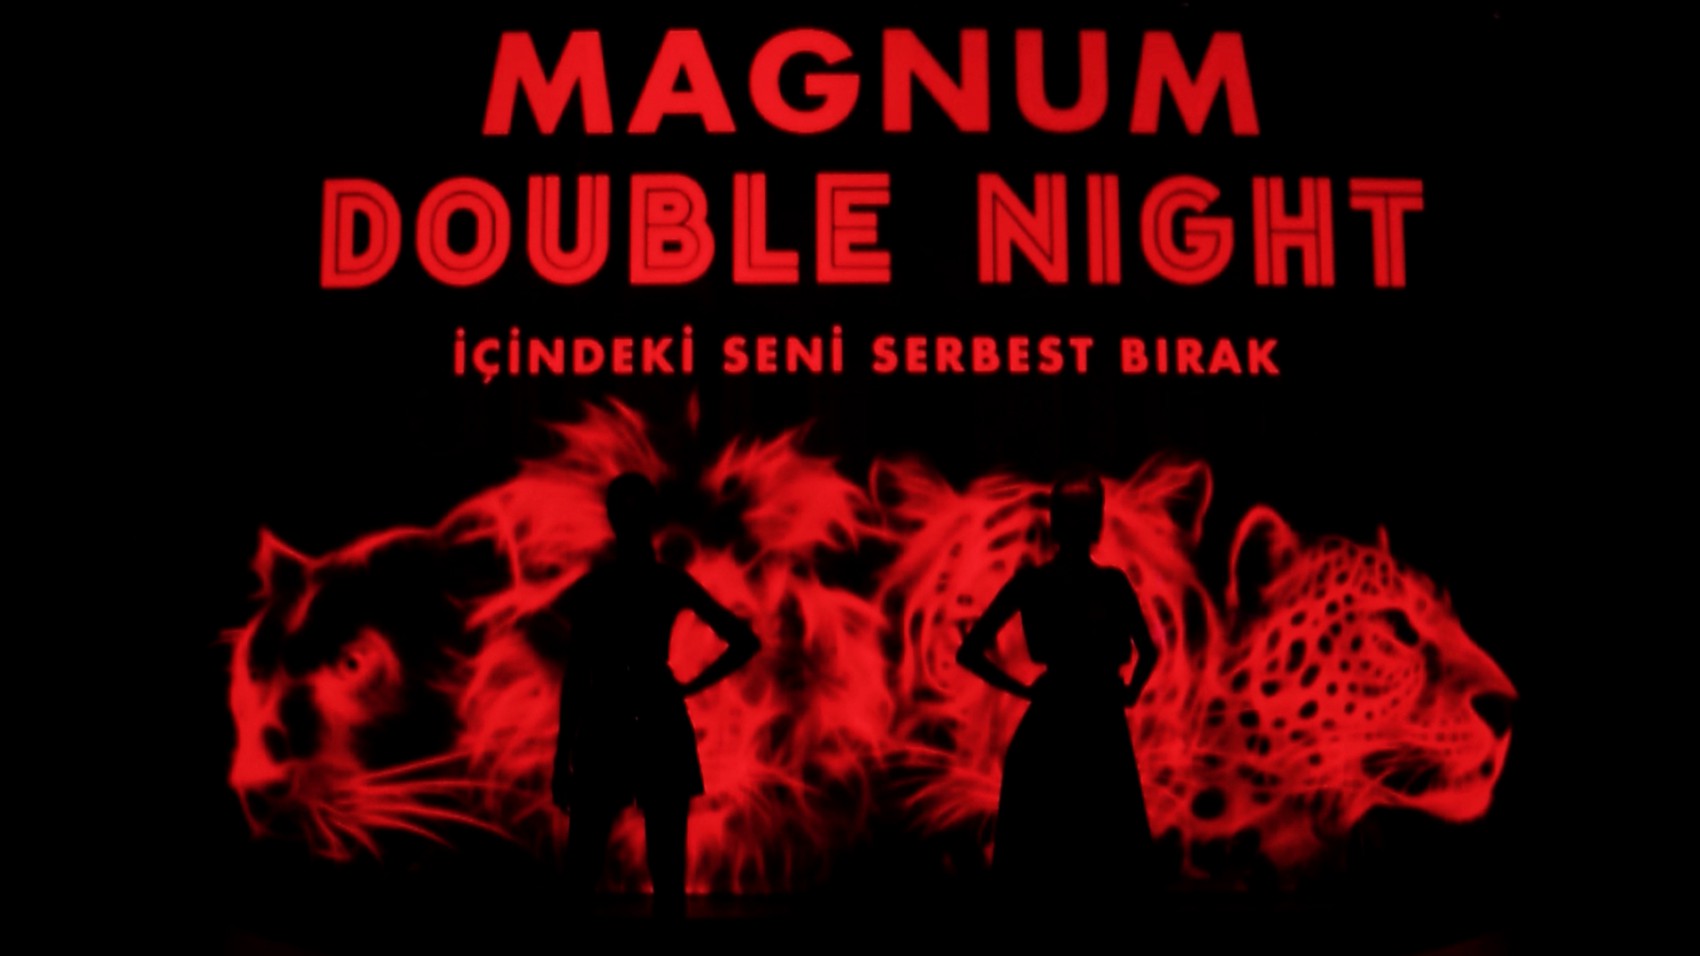 Release The Beast - Magnum Double Night event_5